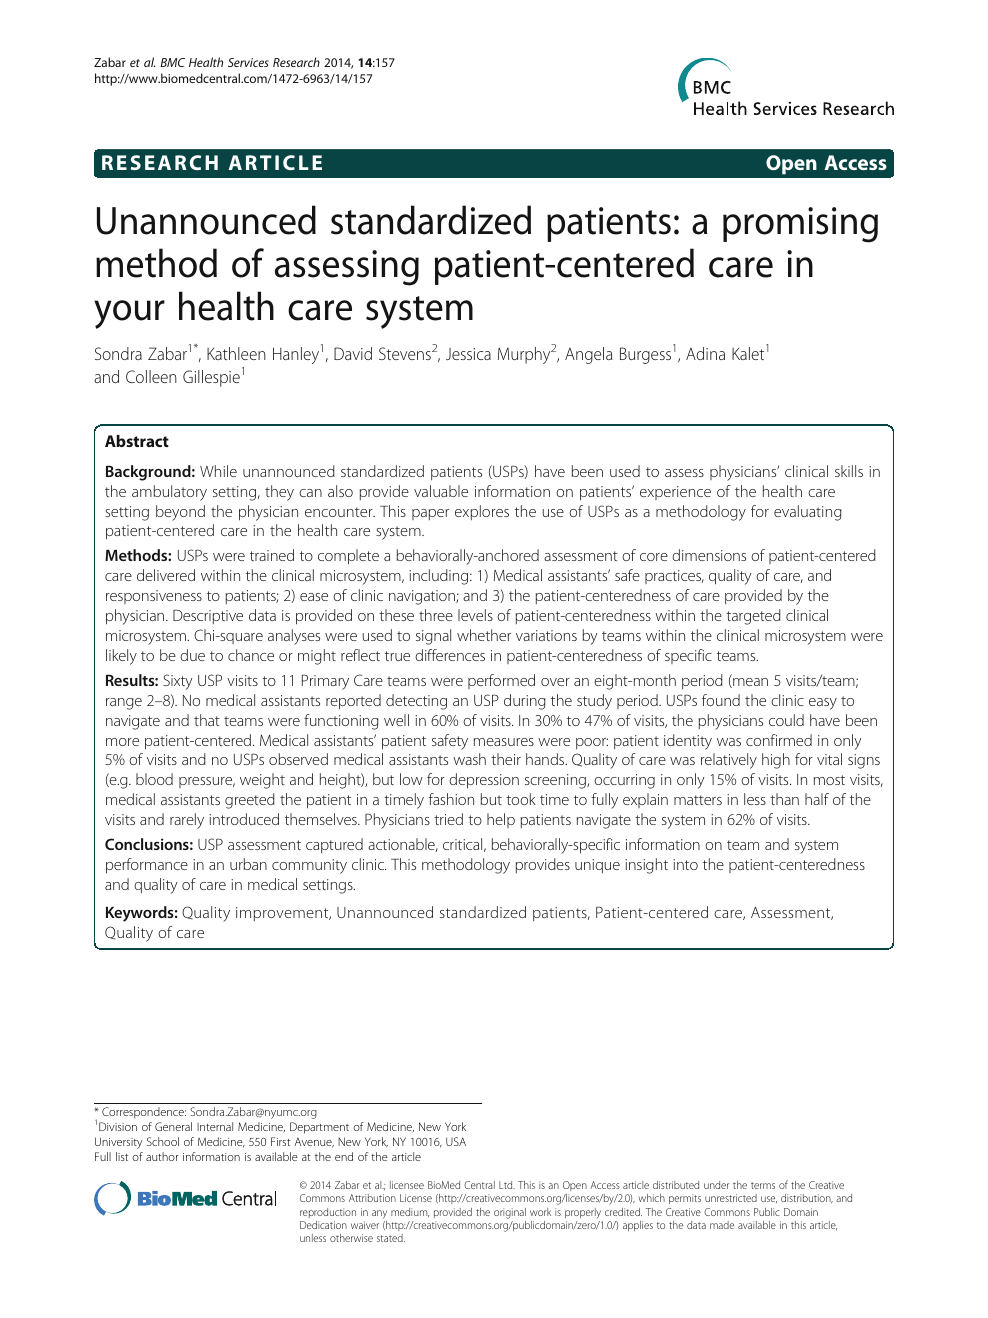 Unannounced Standardized Patients A Promising Method Of Assessing Patient Centered Care In Your Health Care System Topic Of Research Paper In Clinical Medicine Download Scholarly Article Pdf And Read For Free On